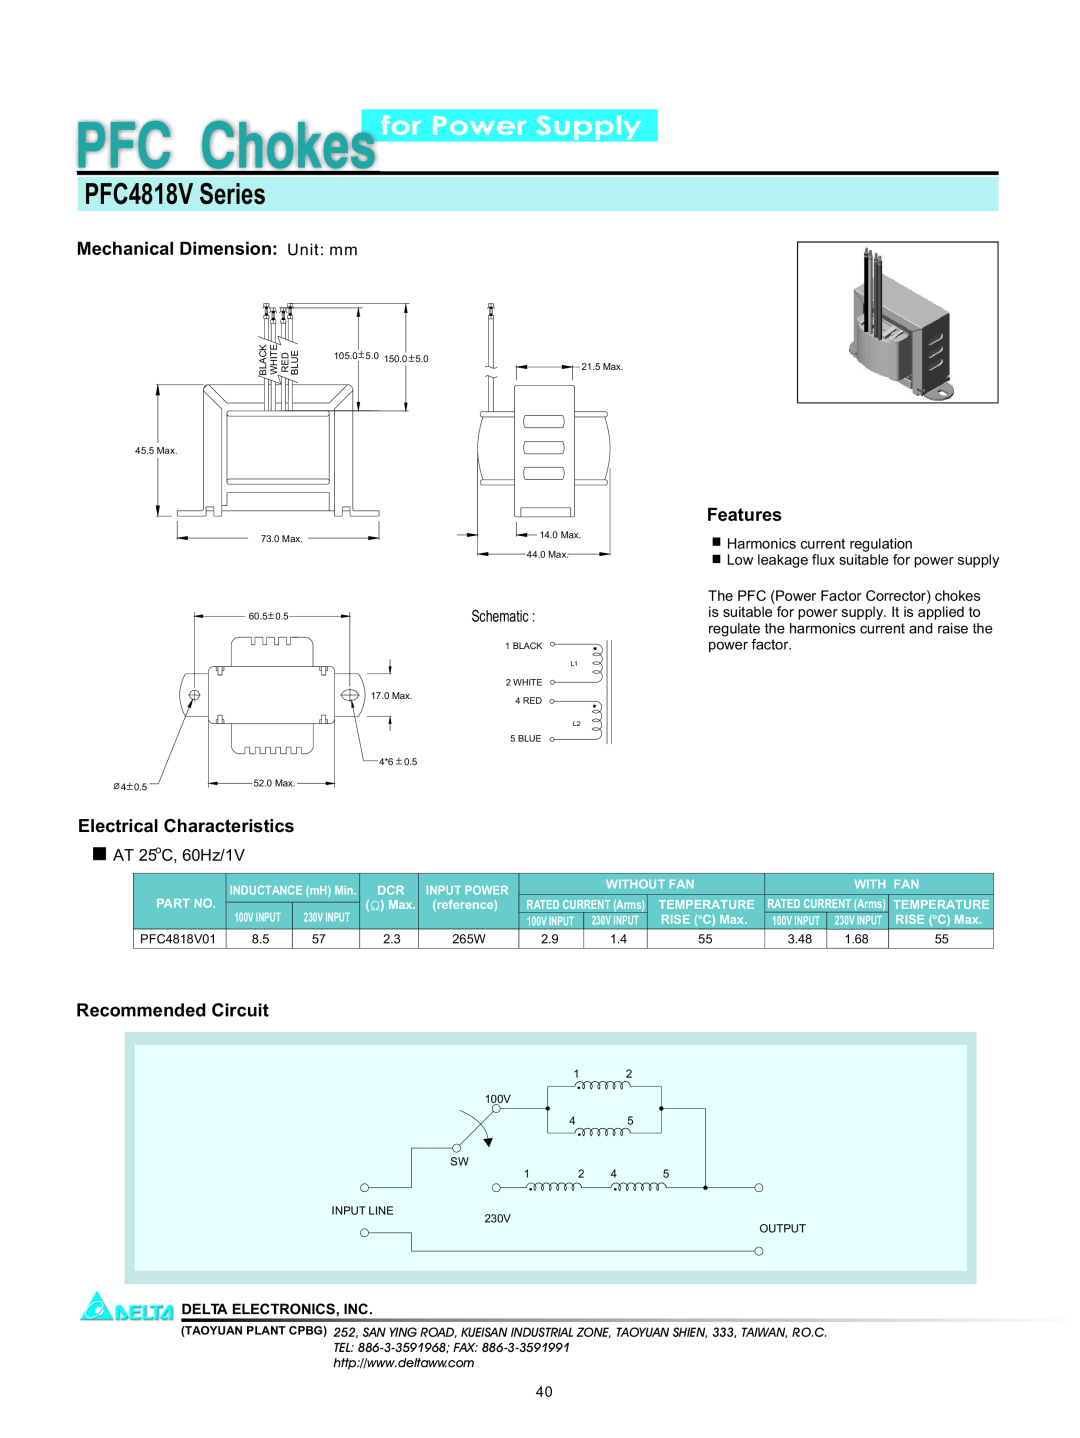 Delta Electronics PFC4818V Series manual for Power Supply, Mechanical Dimension Unit mm, Features, Recommended Circuit 